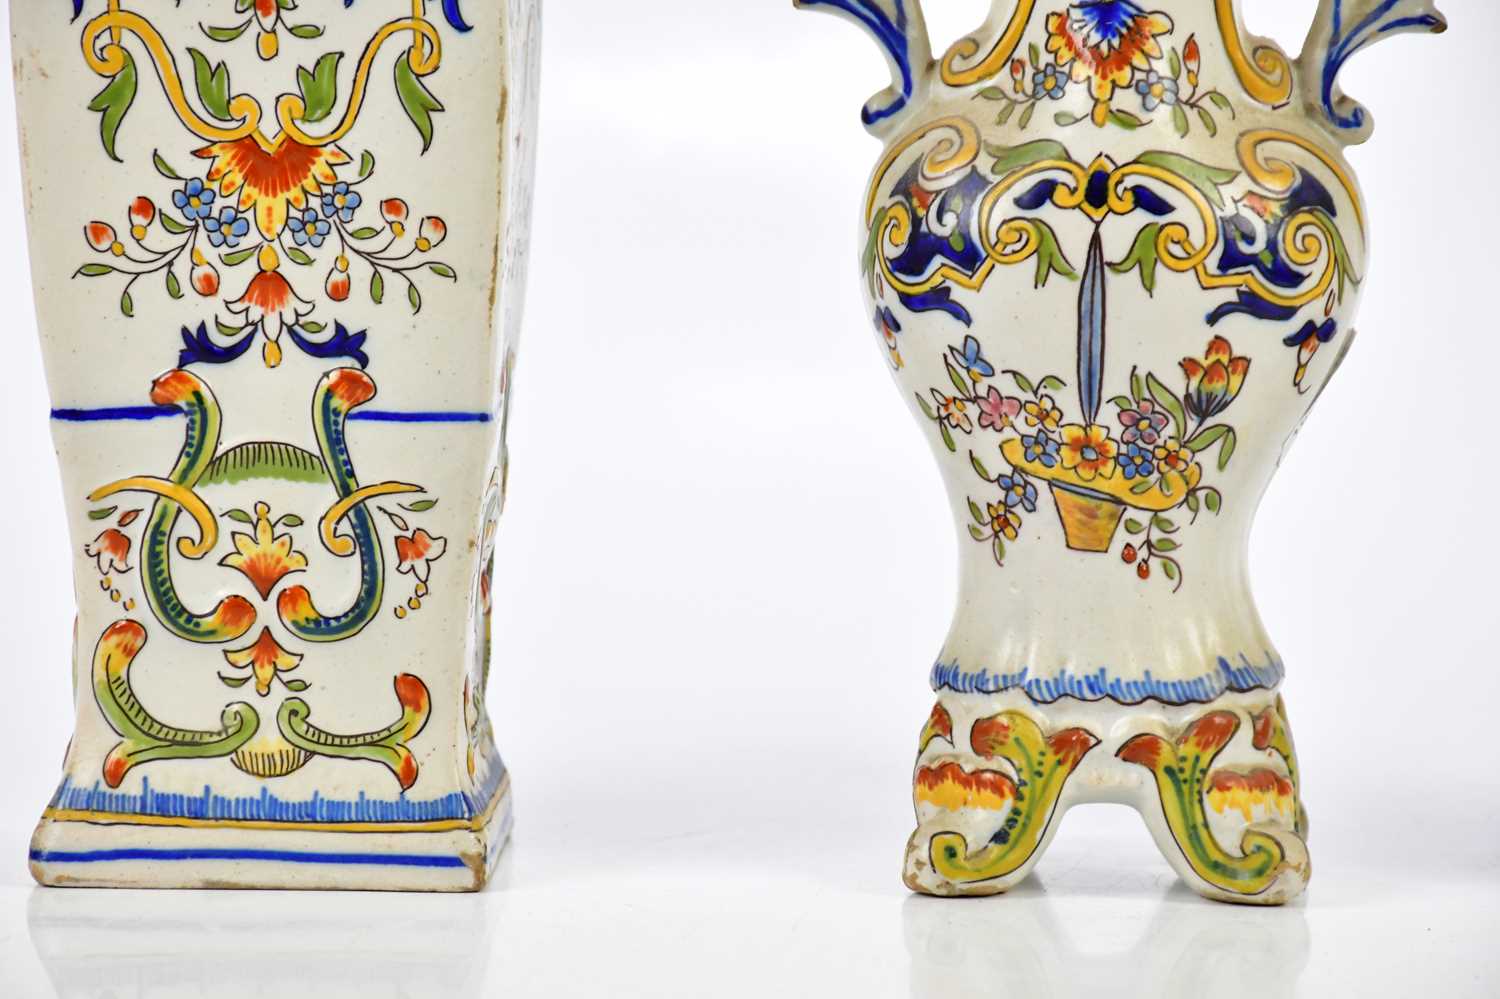 ROUEN; a pair of French faiance ware vases with moulded and painted floral detail, height 21cm, - Image 5 of 6